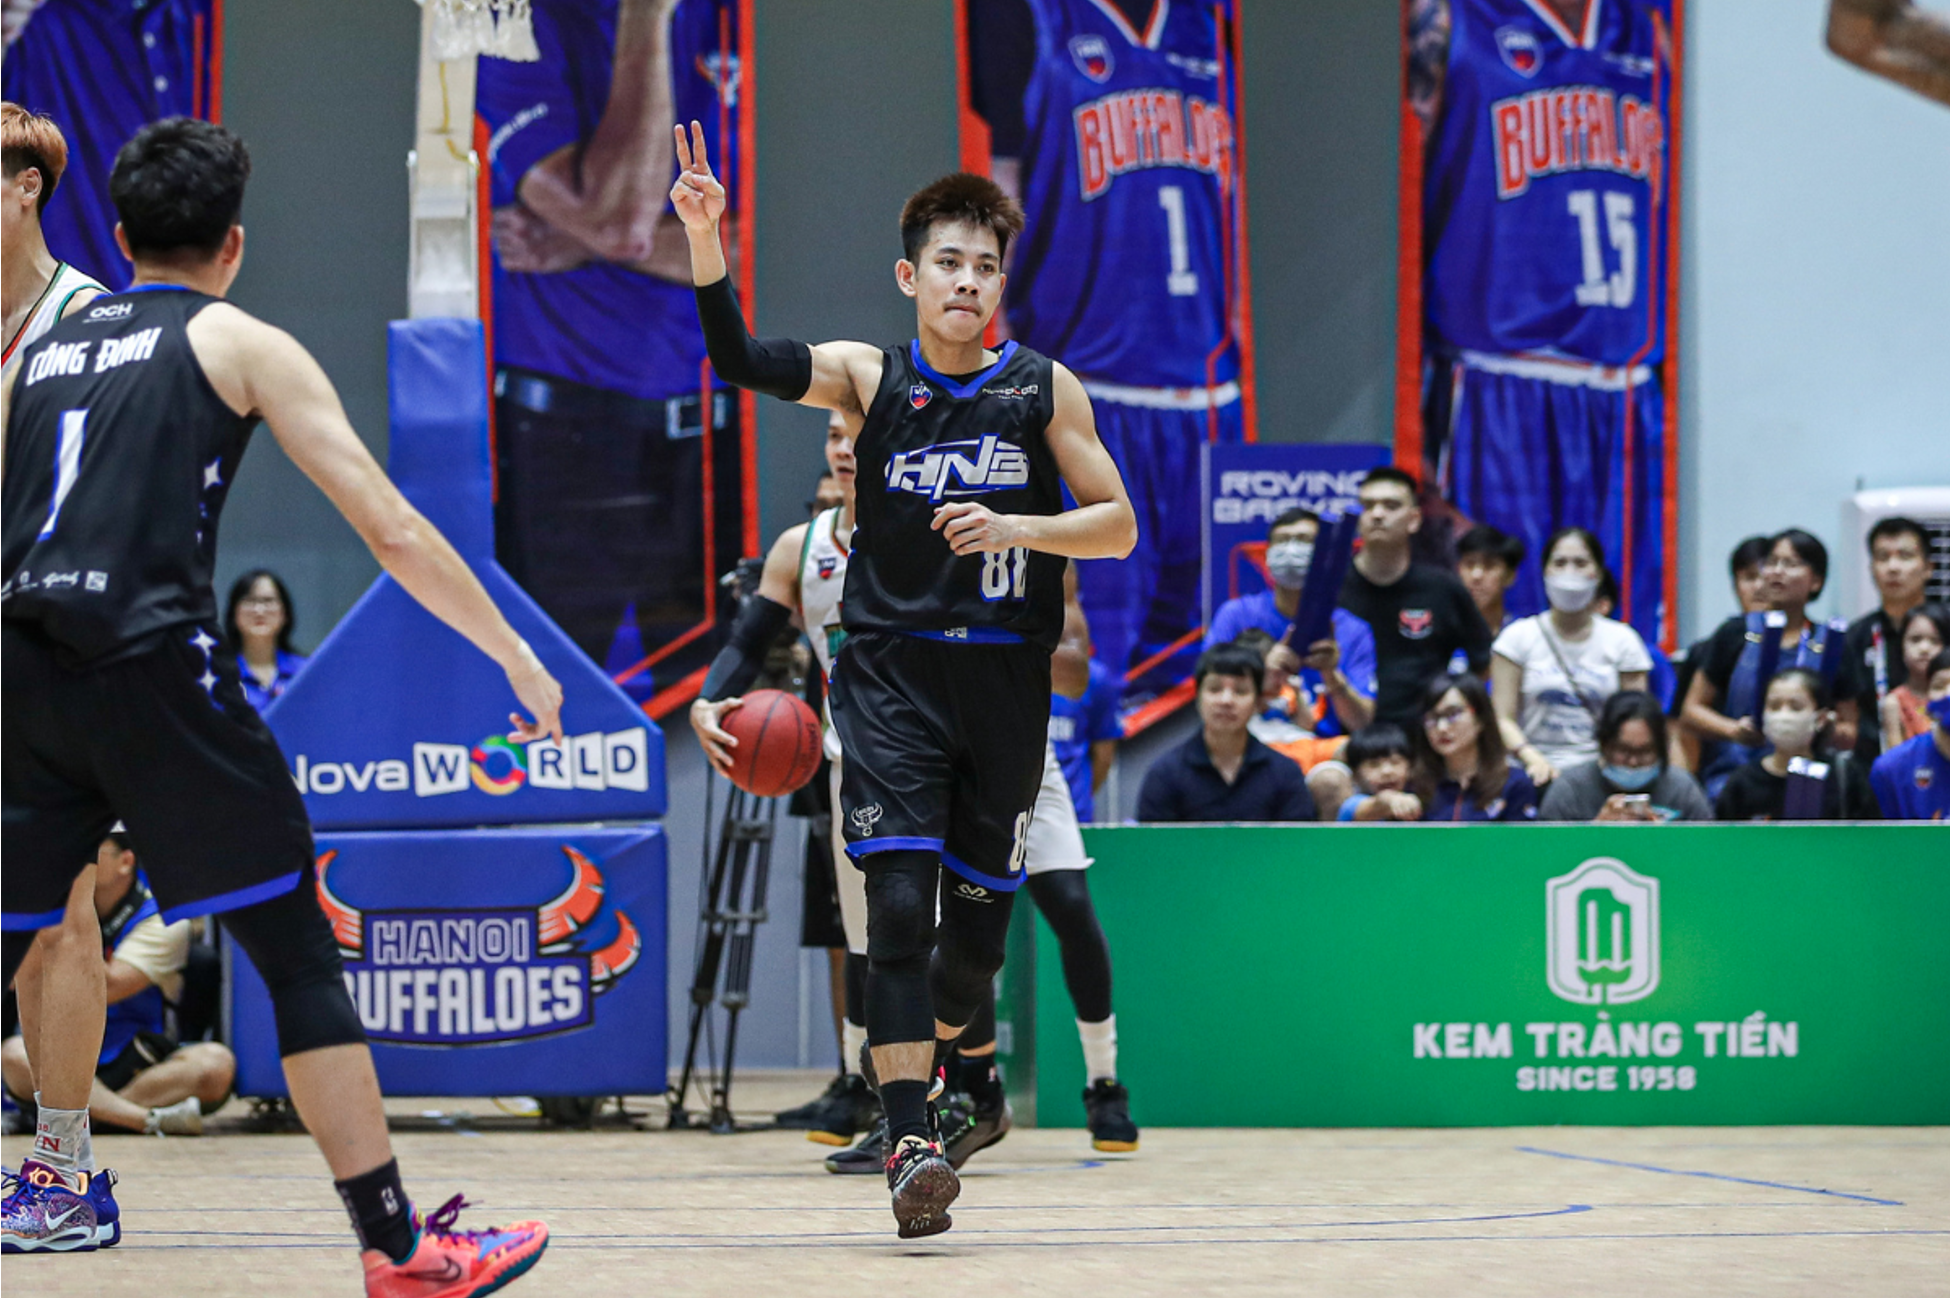 Nguyen Duong Quang Anh used to play for the Vietnamese U20 basketball team at the Cambodia Friendship Games 2018. Photo: VBA